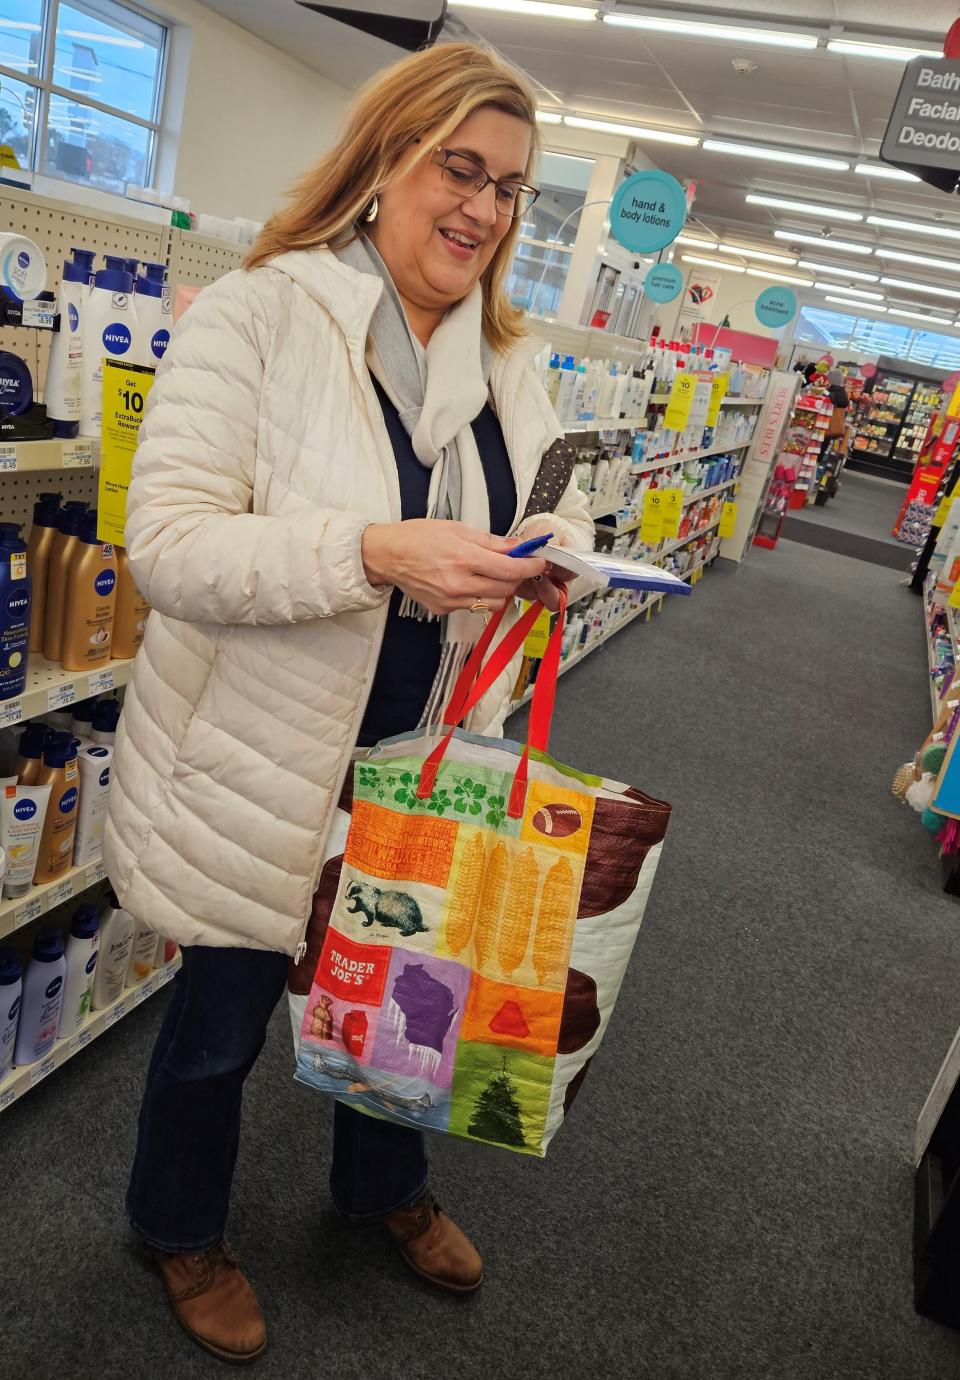 Erin Hunsader checks the shopping list of a senior client as she looks for requested items at the CVS pharmacy in Sturgeon Bay while performing the job of her new business, Erin's Errands.